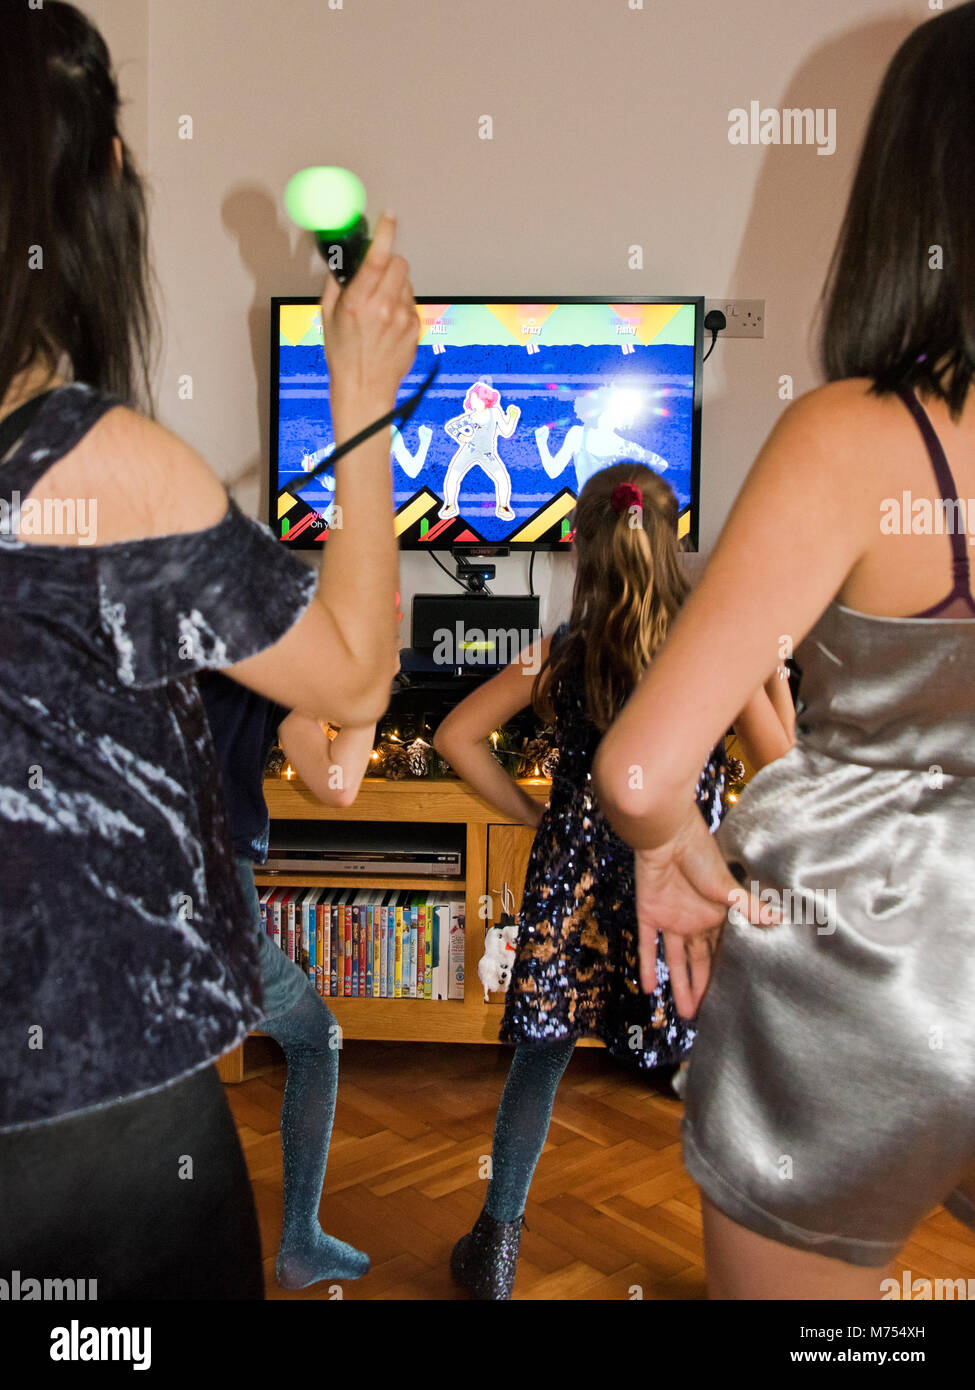 Vertical portrait of four girls dancing and singing together on their games console. Stock Photo